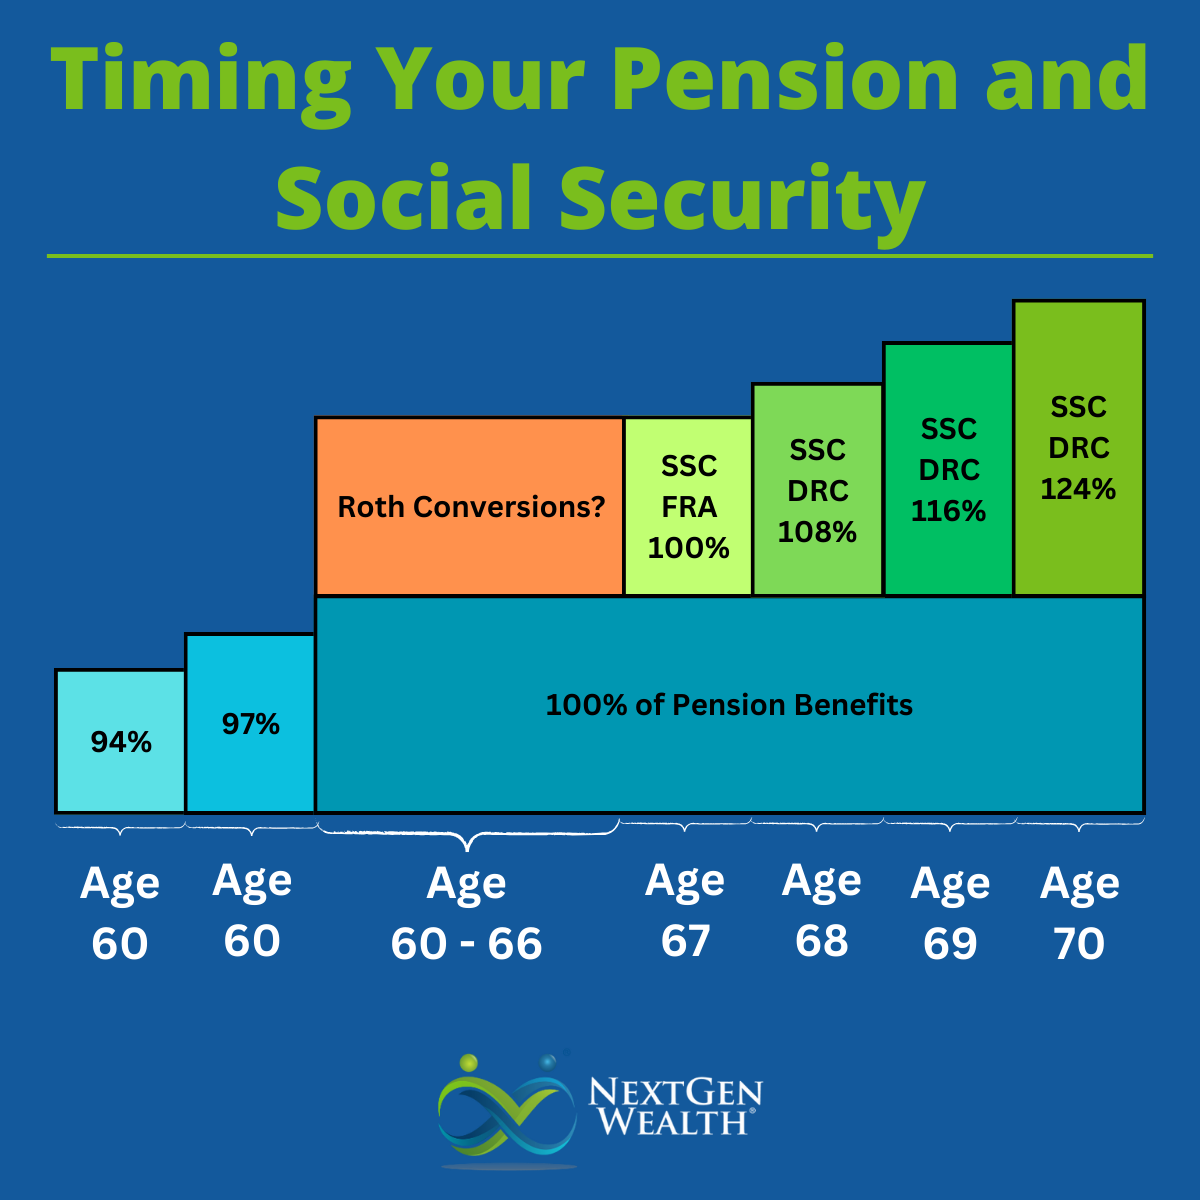 Timing Your Pension and Social Security